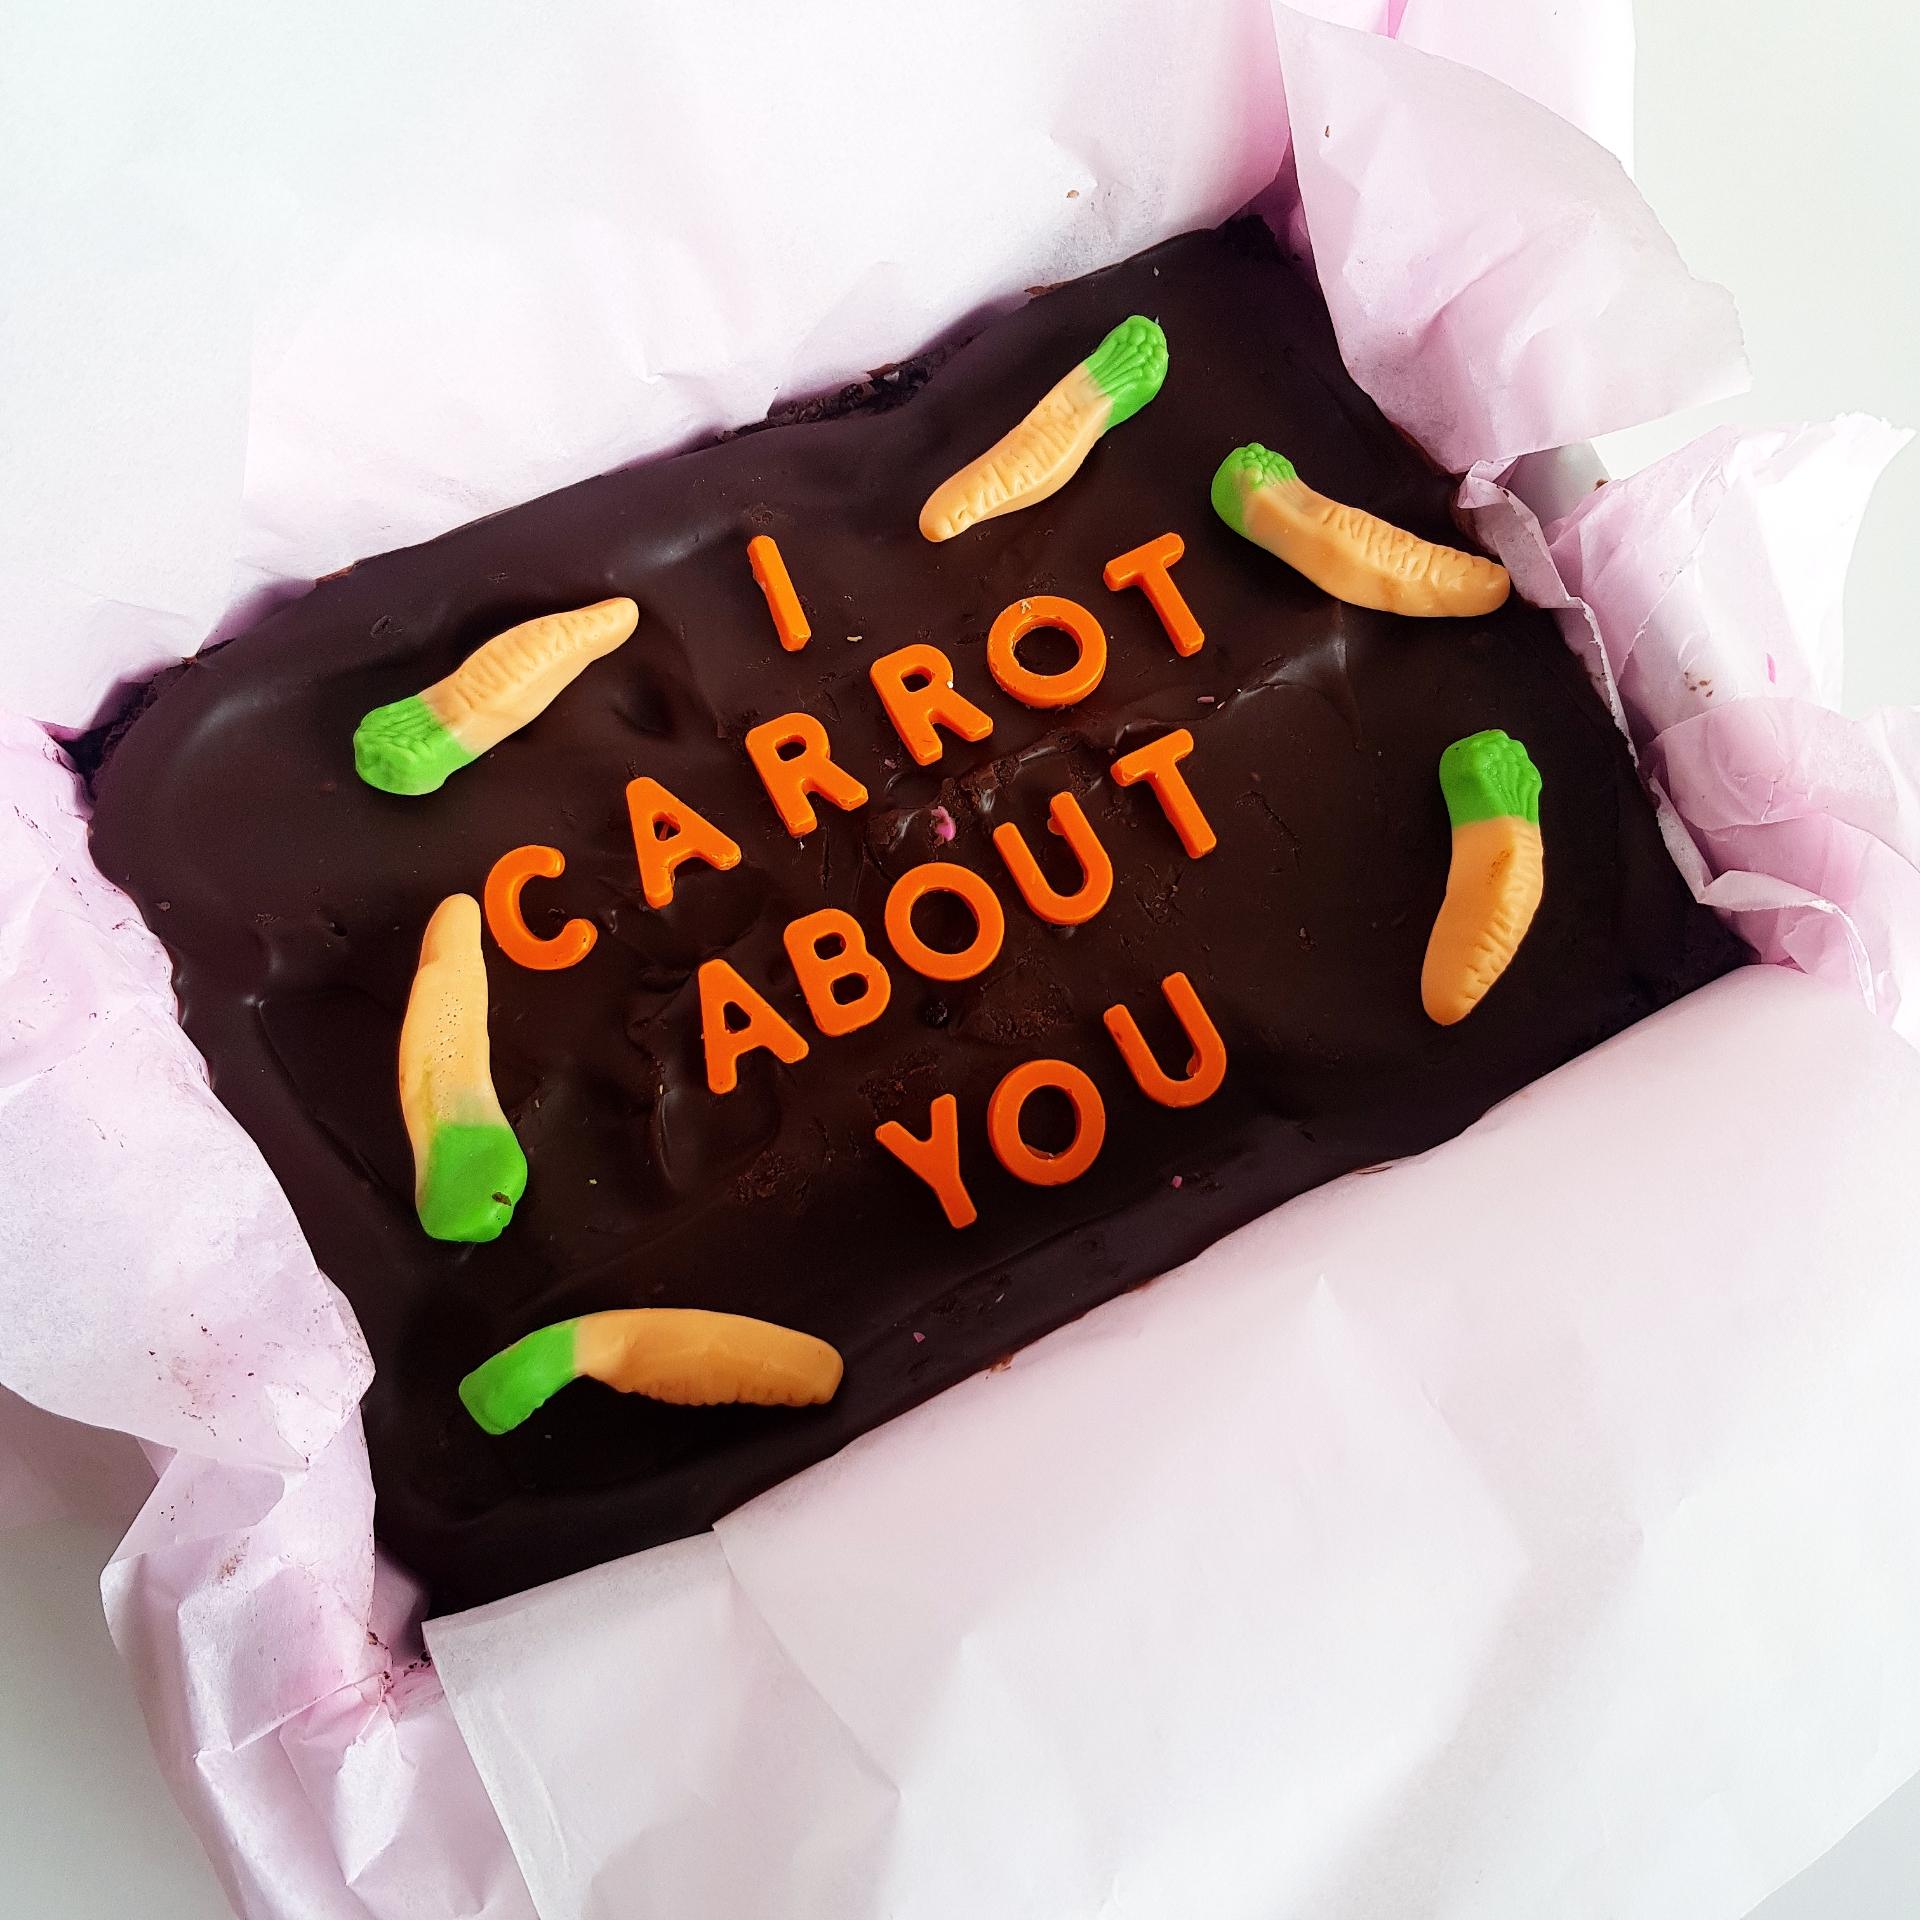 Nationwide: Brownie Message Box – I Carrot About You